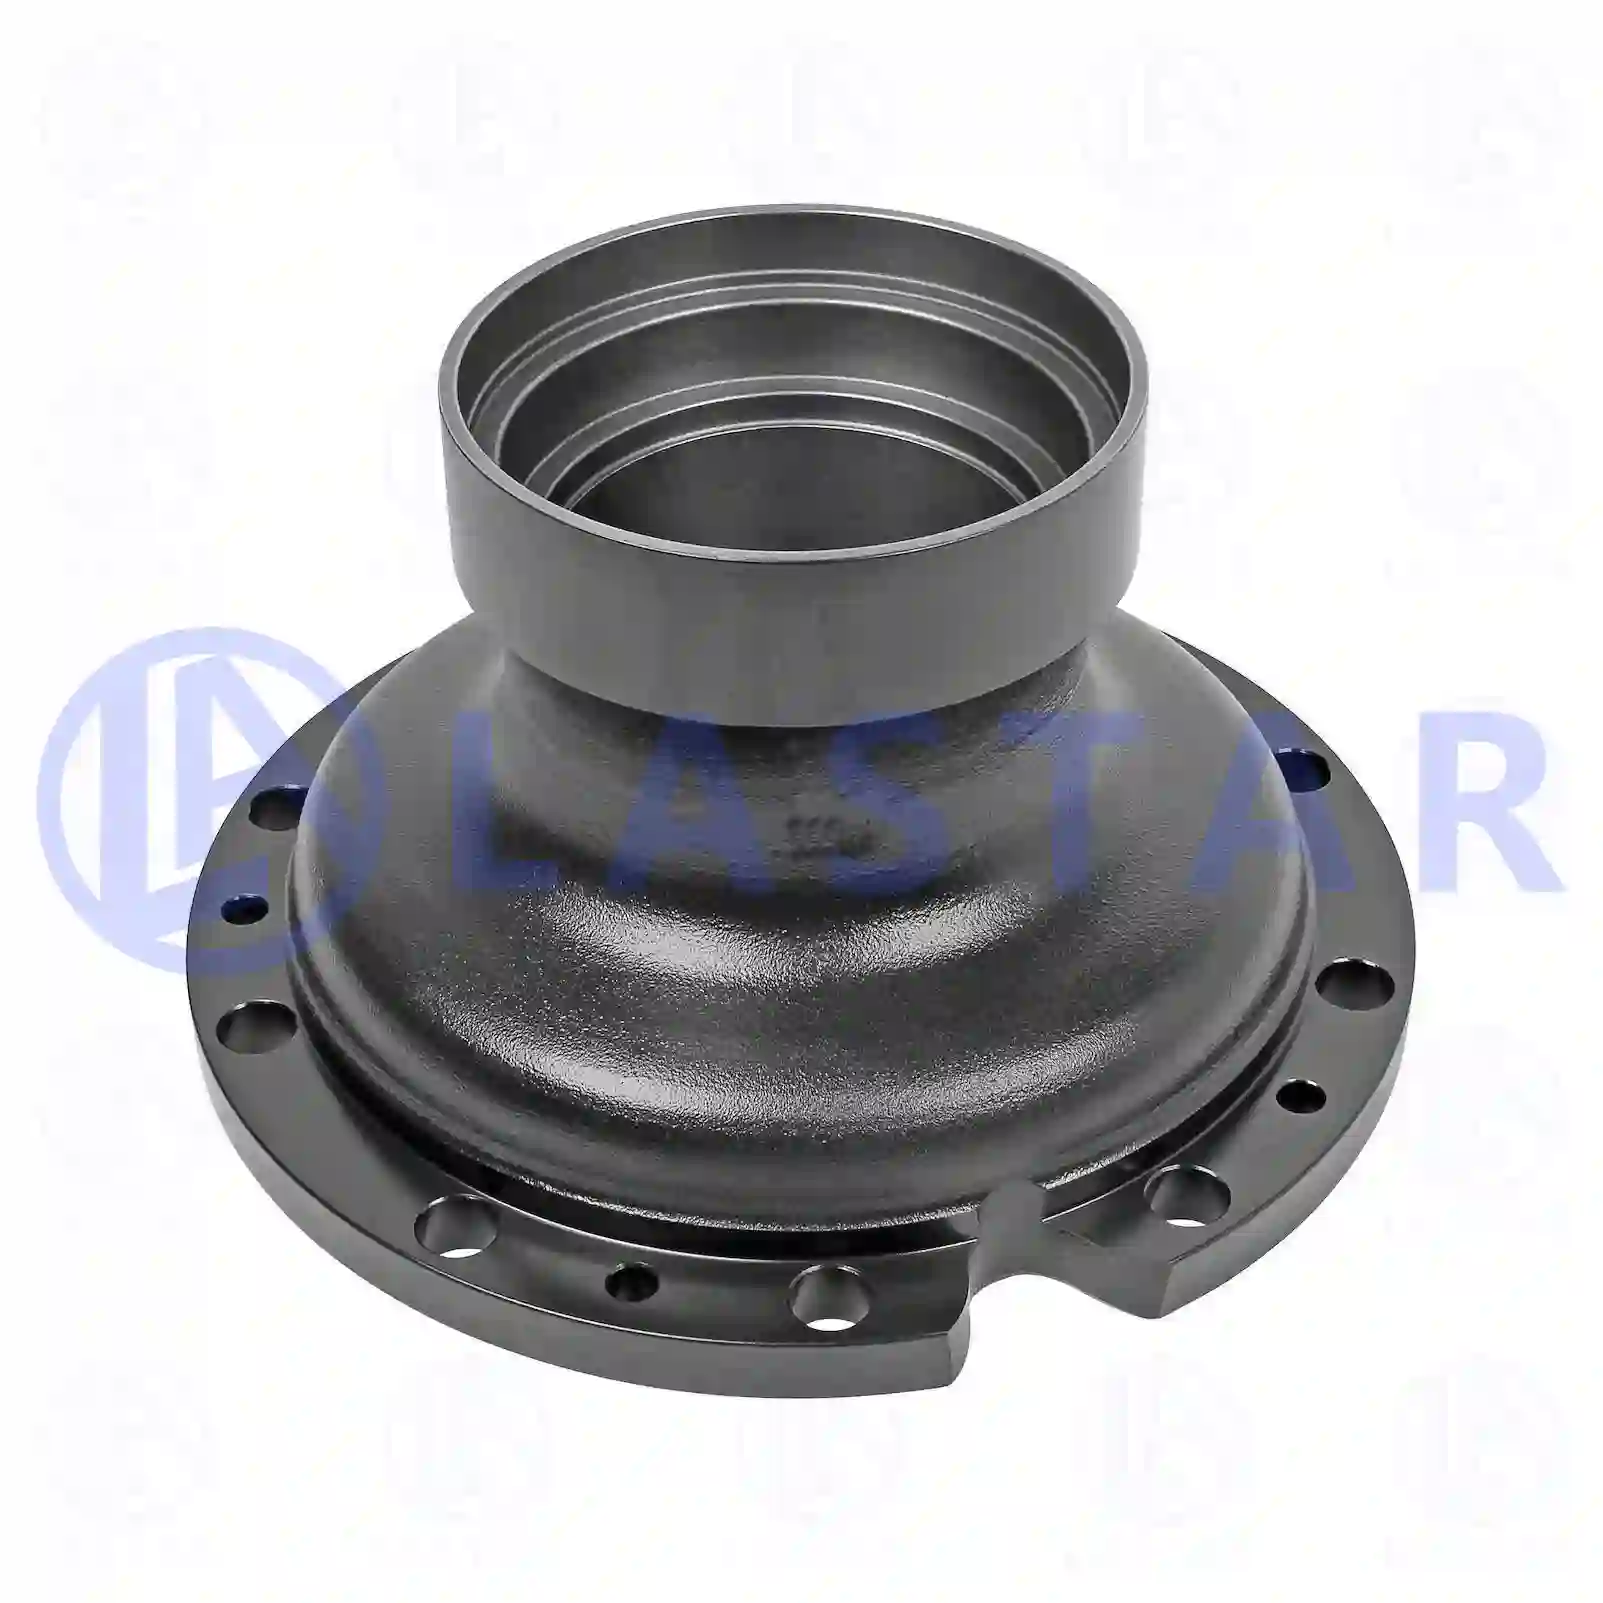 Wheel hub, without bearings, 77726320, 3463340601, 3463341101, , , , ||  77726320 Lastar Spare Part | Truck Spare Parts, Auotomotive Spare Parts Wheel hub, without bearings, 77726320, 3463340601, 3463341101, , , , ||  77726320 Lastar Spare Part | Truck Spare Parts, Auotomotive Spare Parts